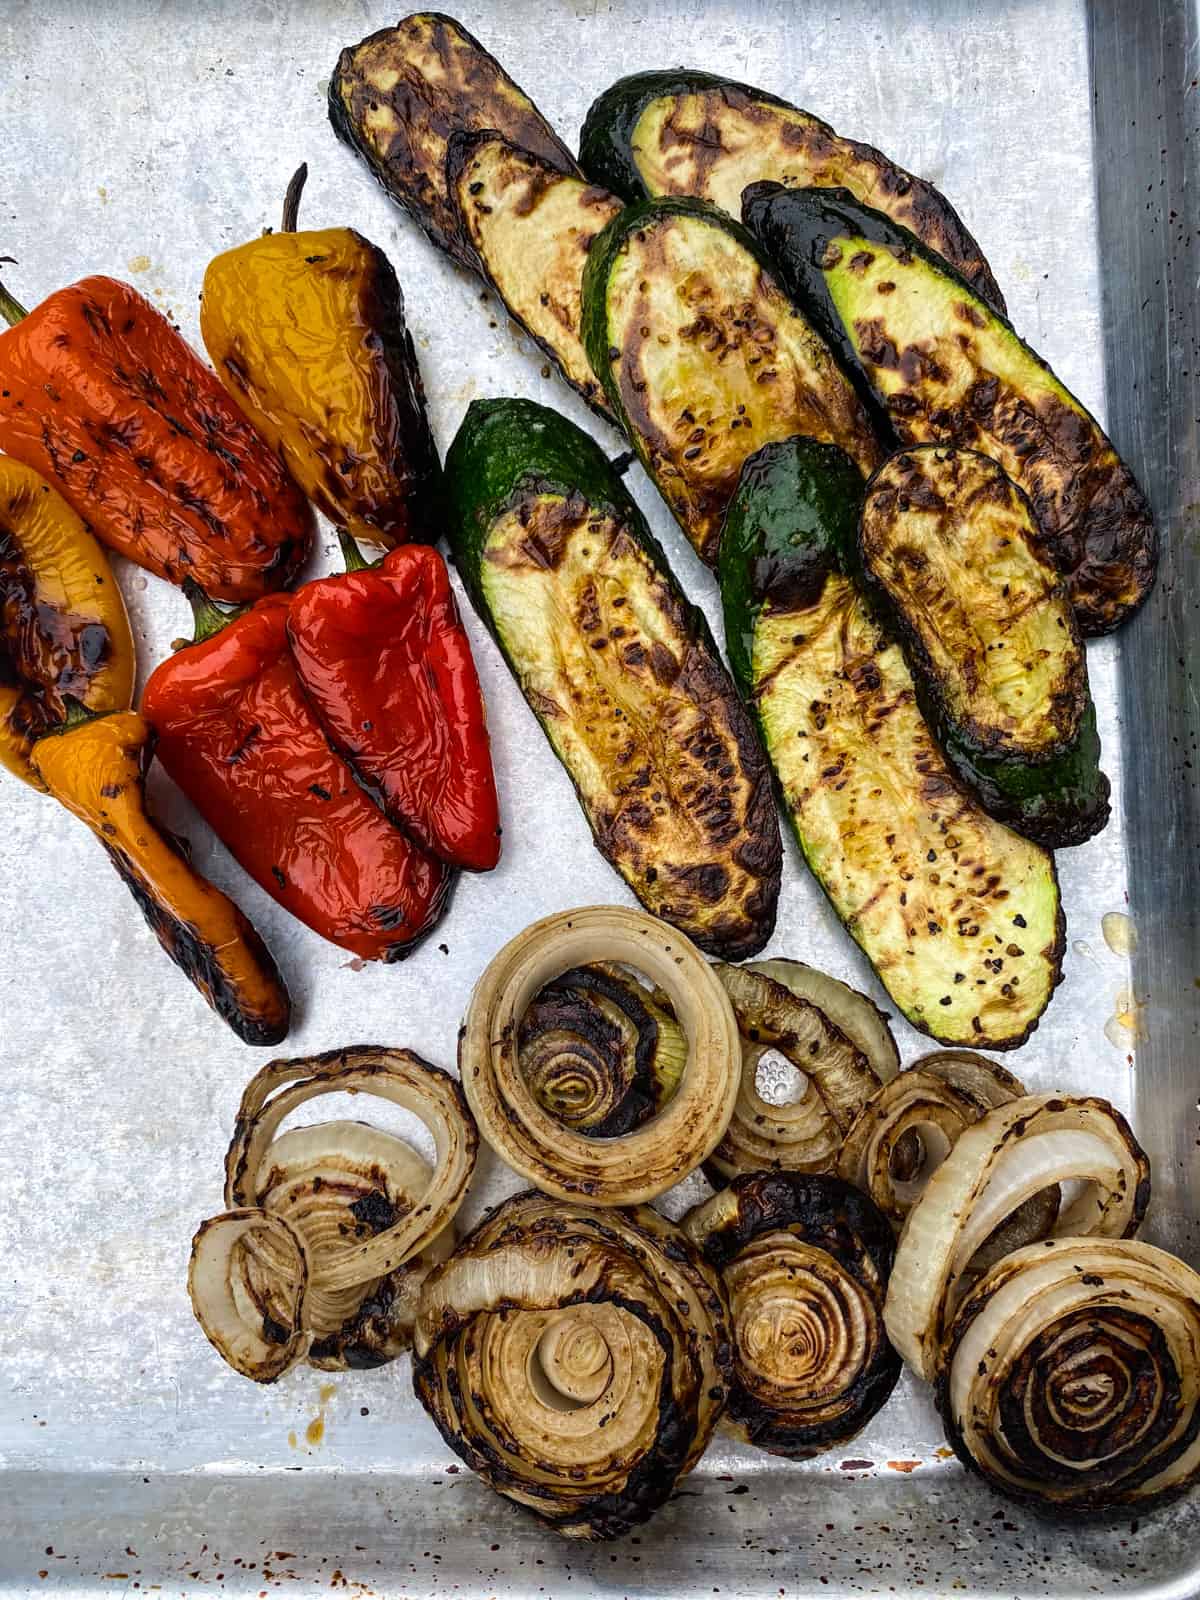 Grill the vegetables ontul charred and tender.